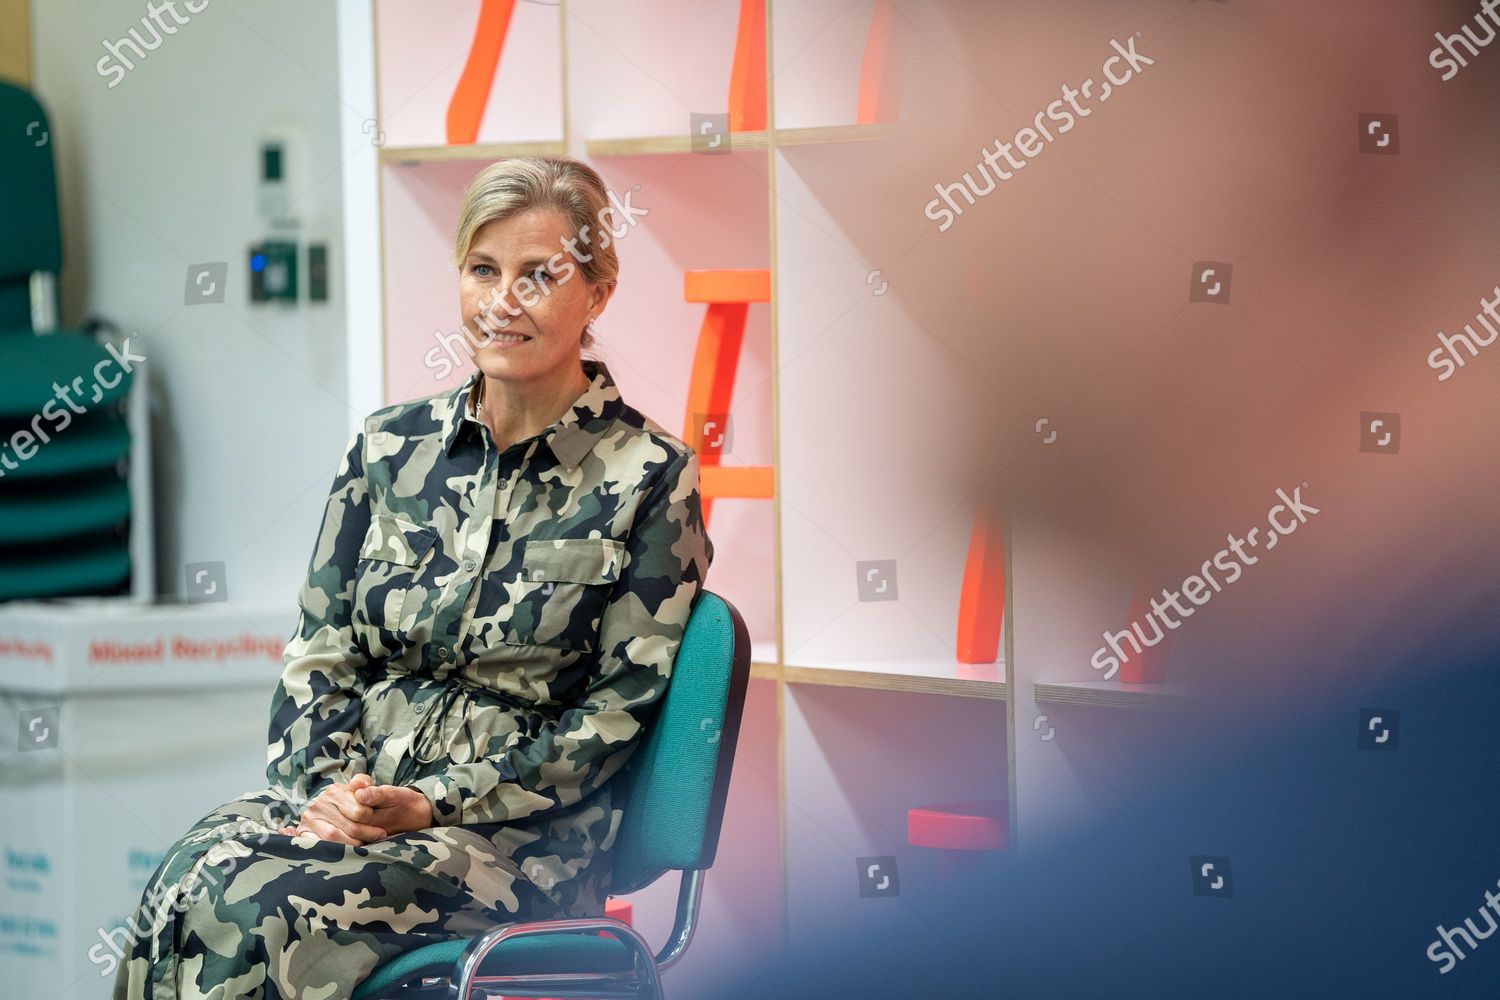 sophie-countess-of-wessex-joins-a-counselling-shift-at-childline-nspcc-hq-london-uk-shutterstock-editorial-10682513j.jpg